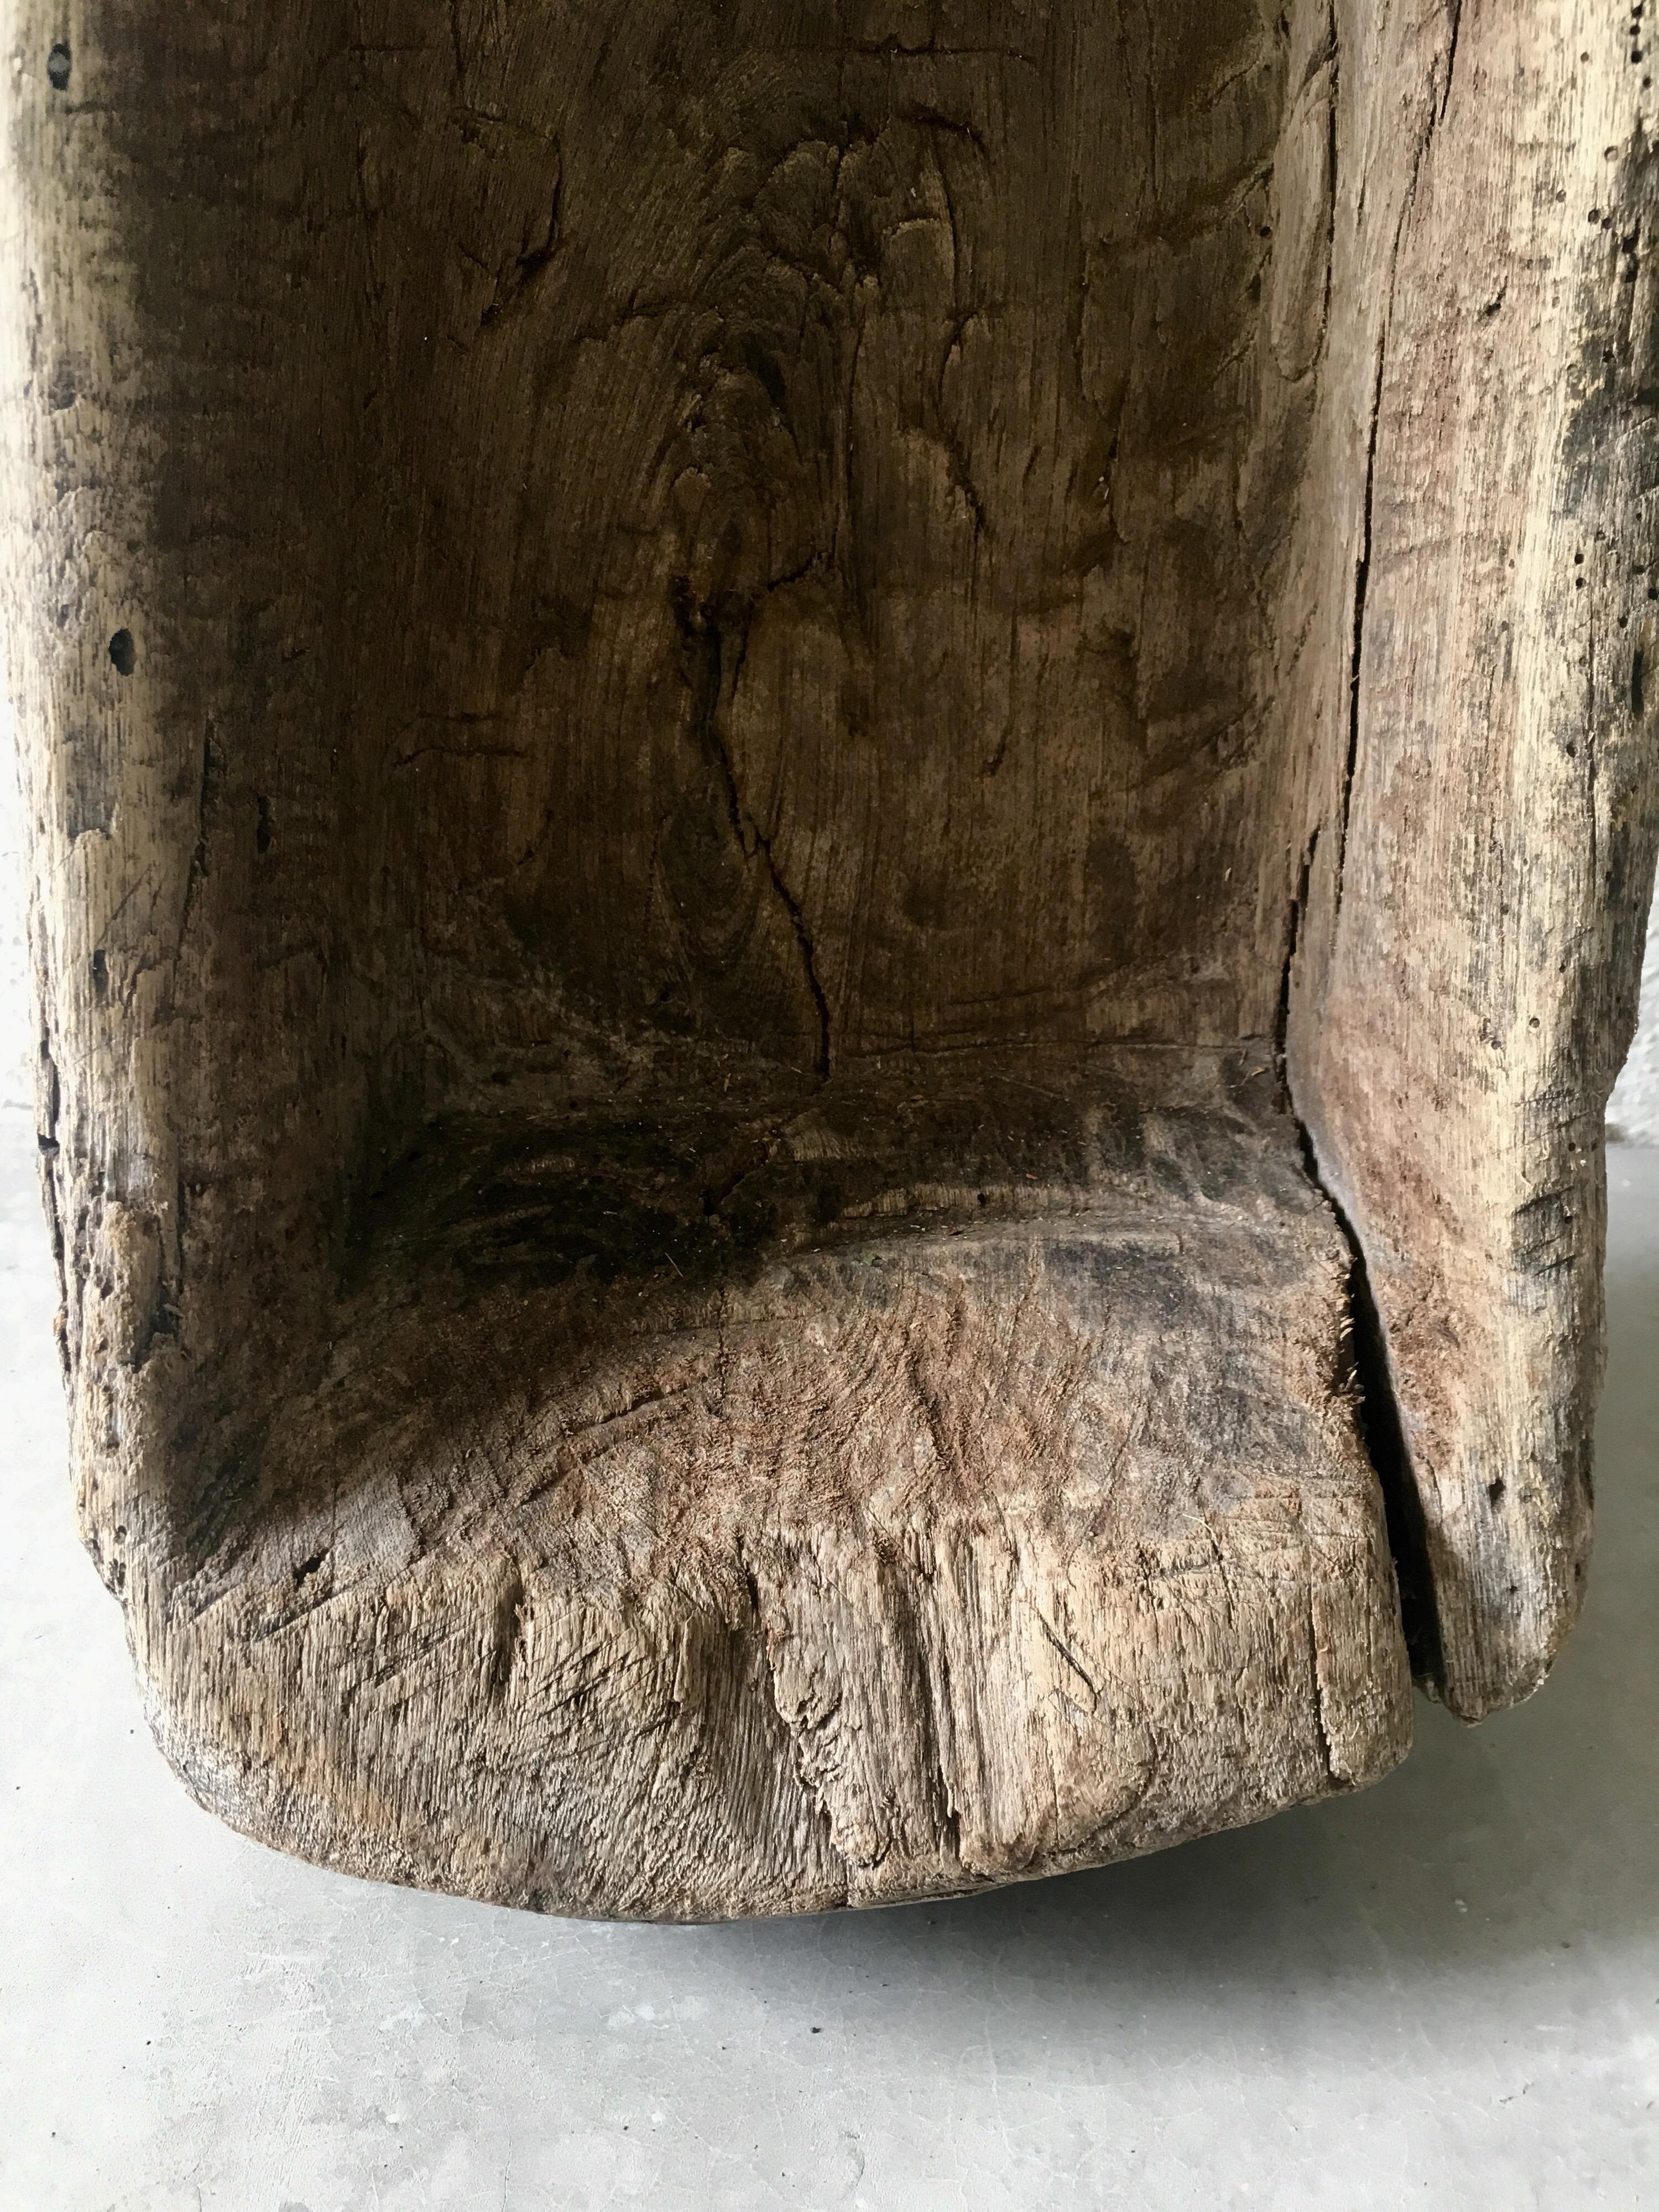 1970s hand-carved mesquite trough from Guanajuato, Mexico. Carved using axe and chisel. Once used as a feeder for chickens.